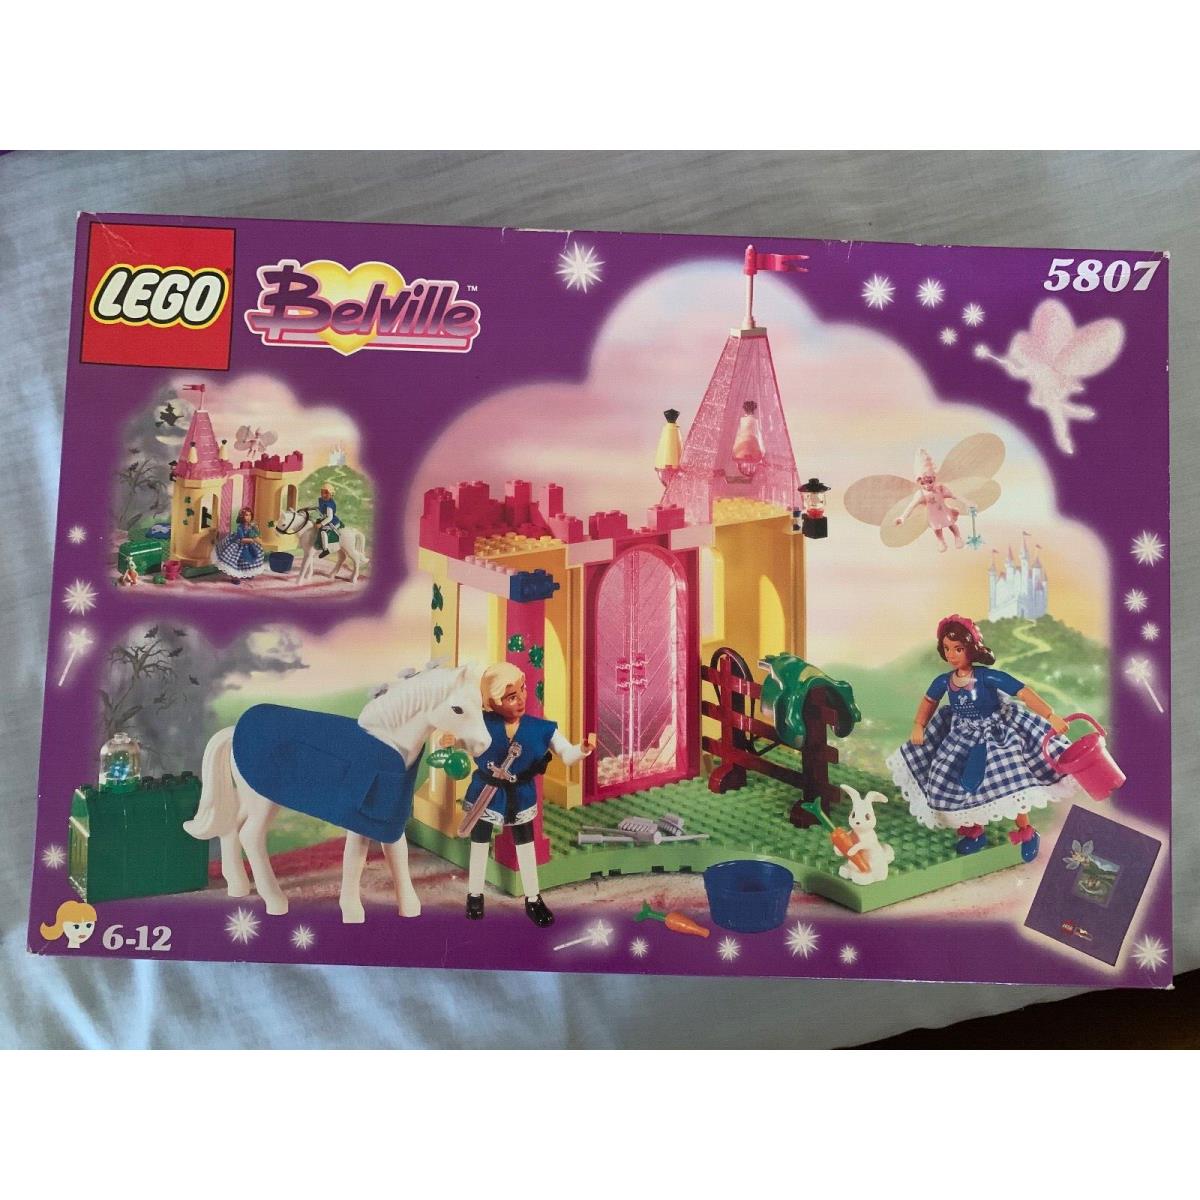 Lego Belville 5807 The Royal Stable 1999 57pcs